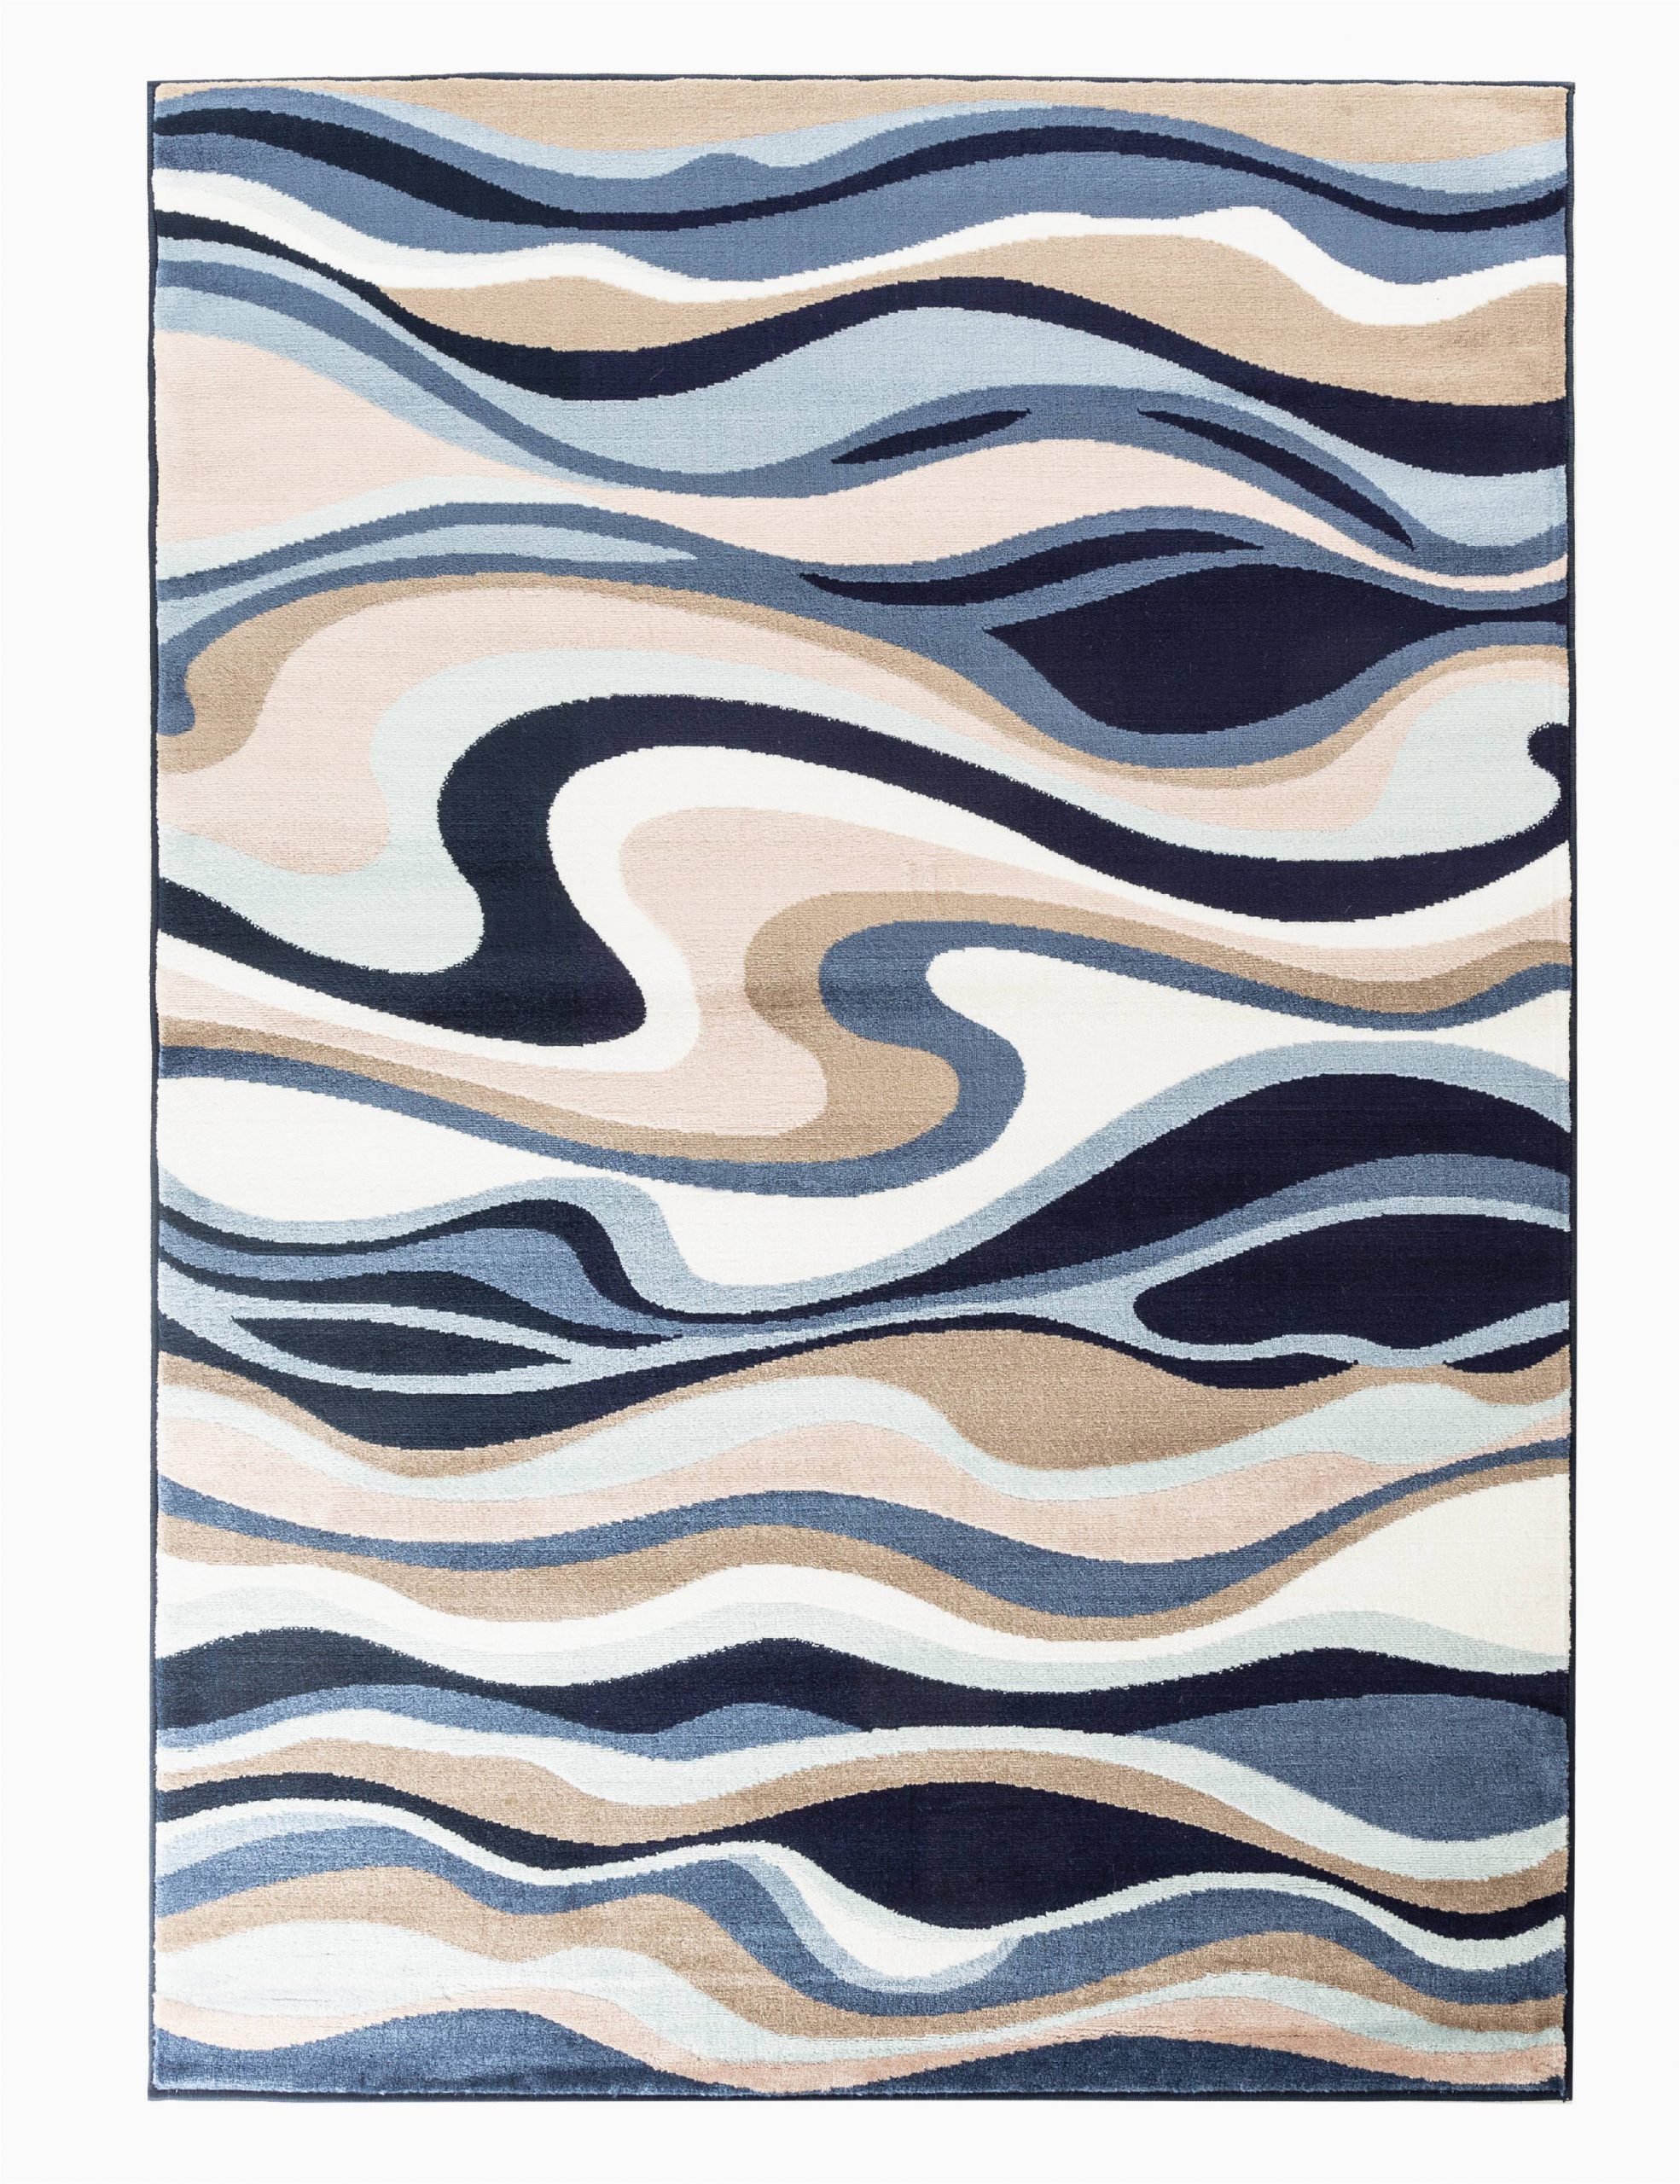 Better Homes and Gardens Waves area Rug Romance Collection Rugs Blue White Brown Absreact Wave Design Premium soft area Rug 2 X3 Door Scatter Mat